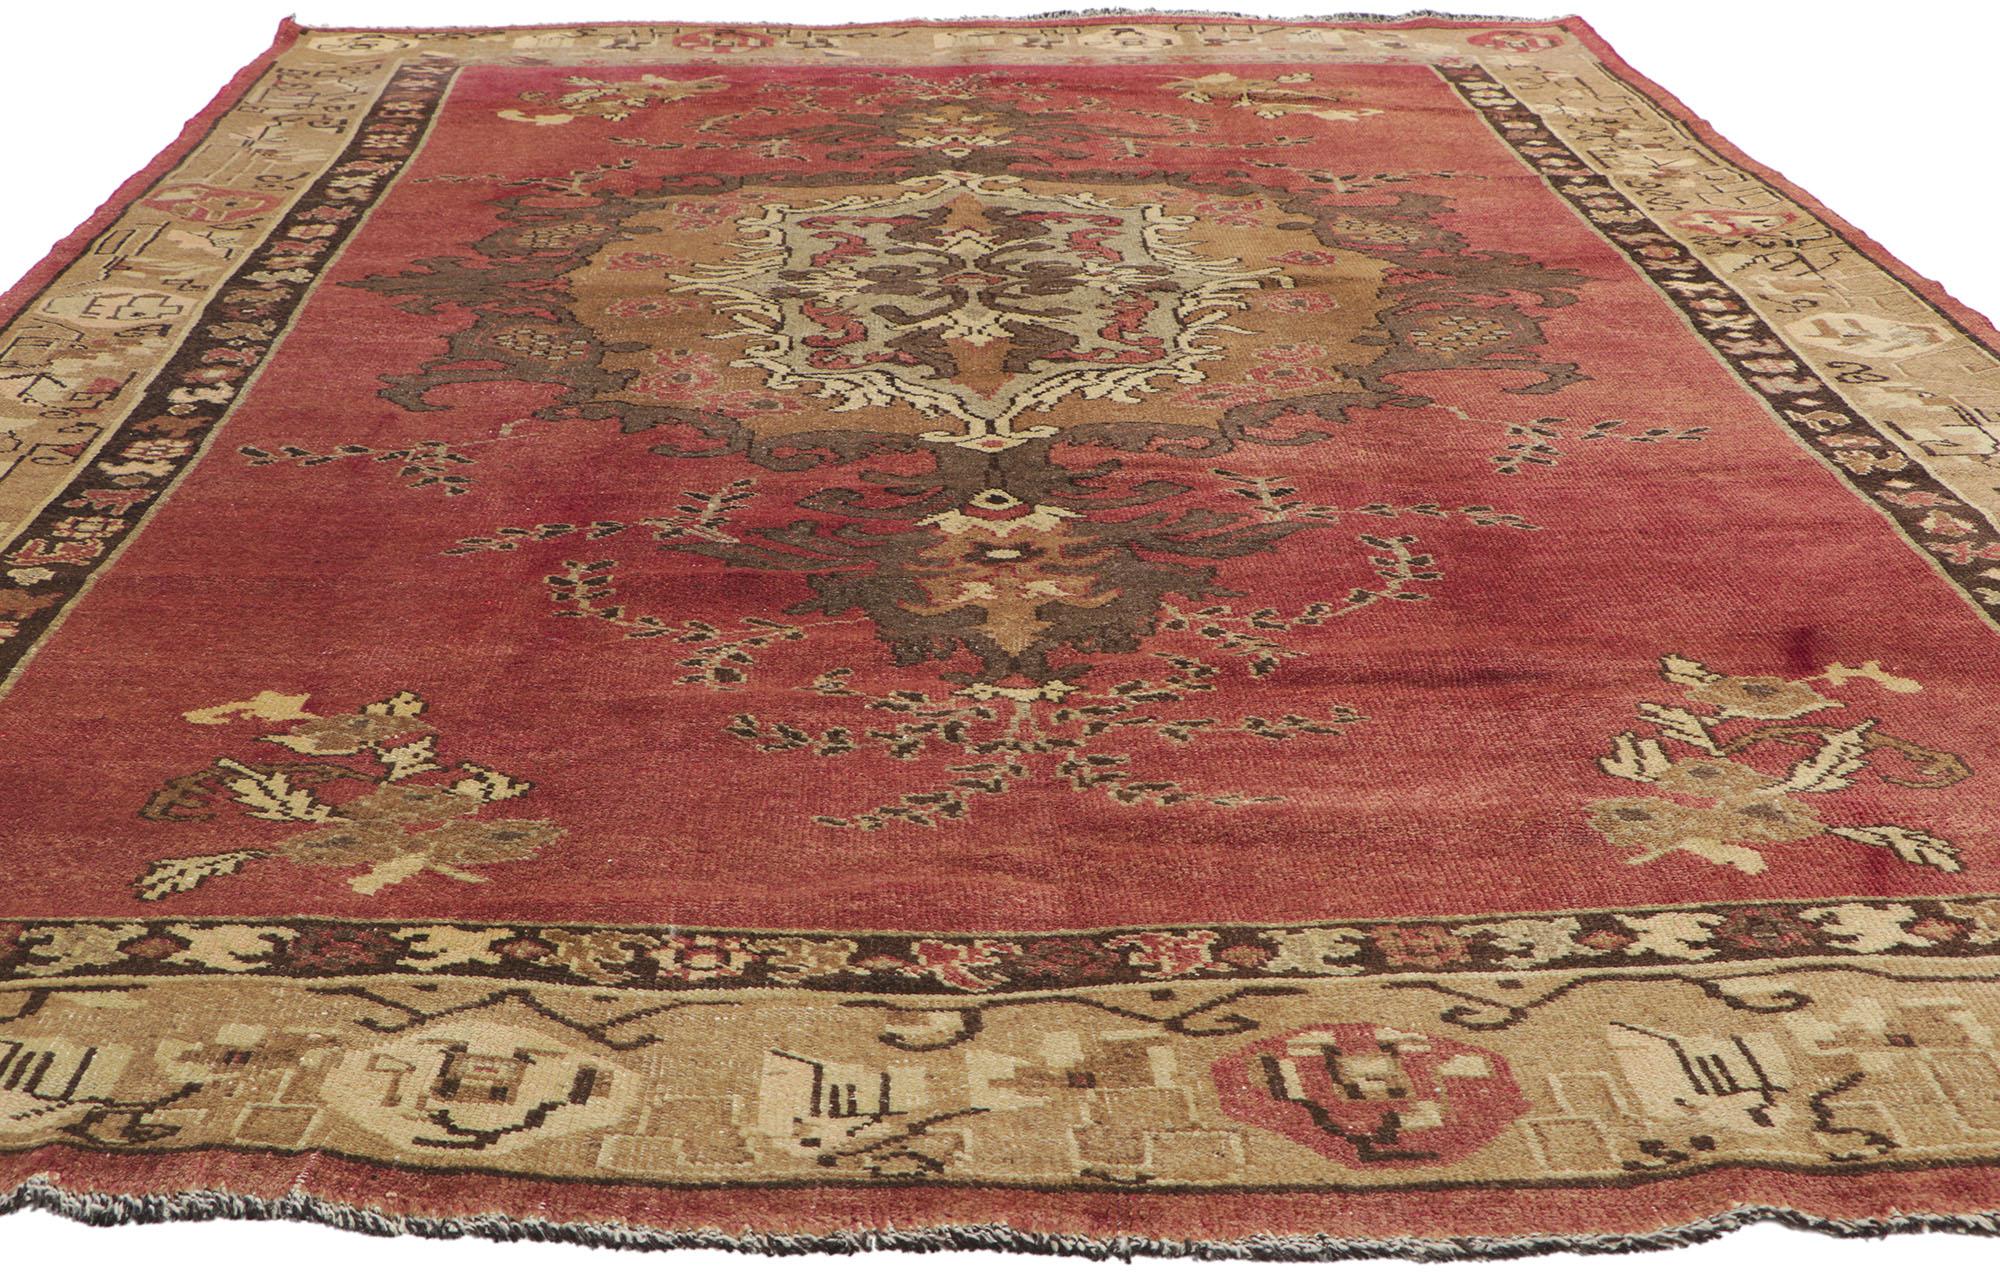 Distressed Vintage Turkish Oushak Rug with Rustic Artisan Style In Distressed Condition For Sale In Dallas, TX